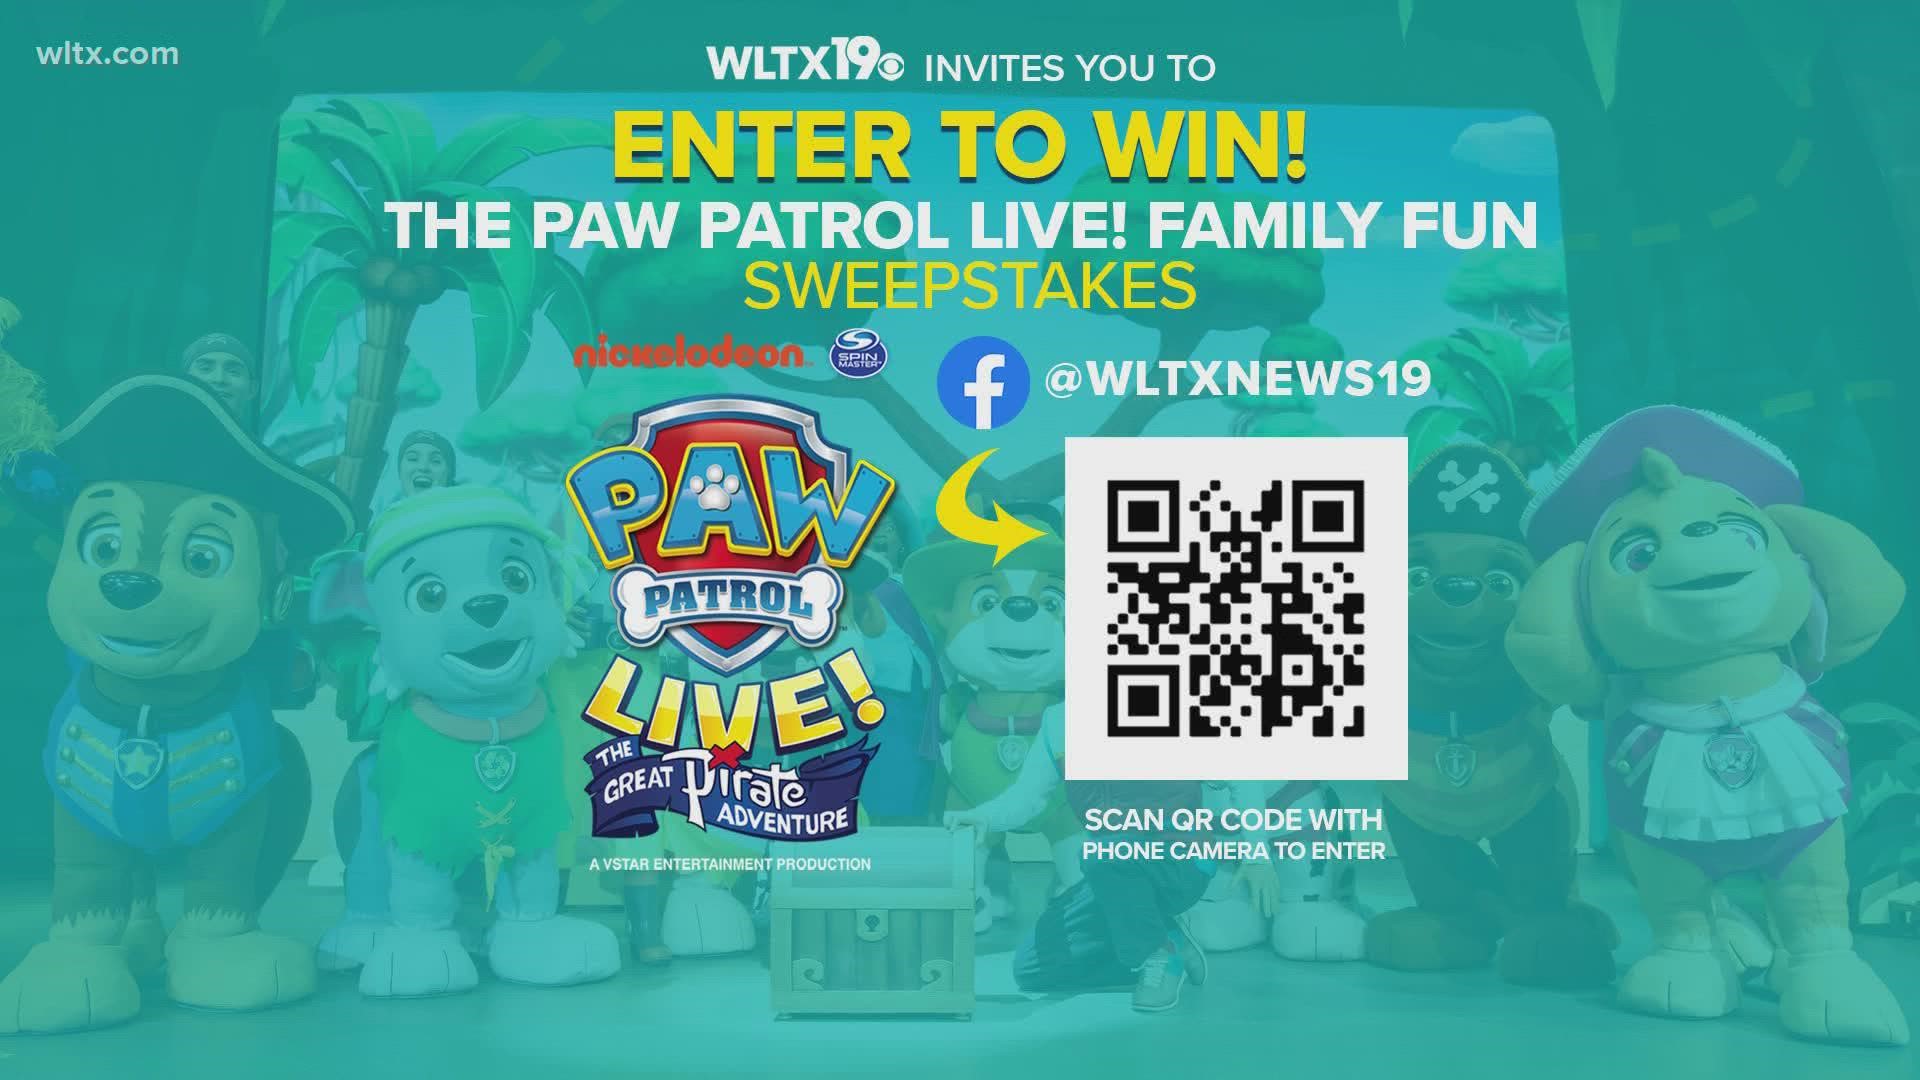 Five lucky winners will receive a family fun pack of four tickets to see Paw Patrol Live.